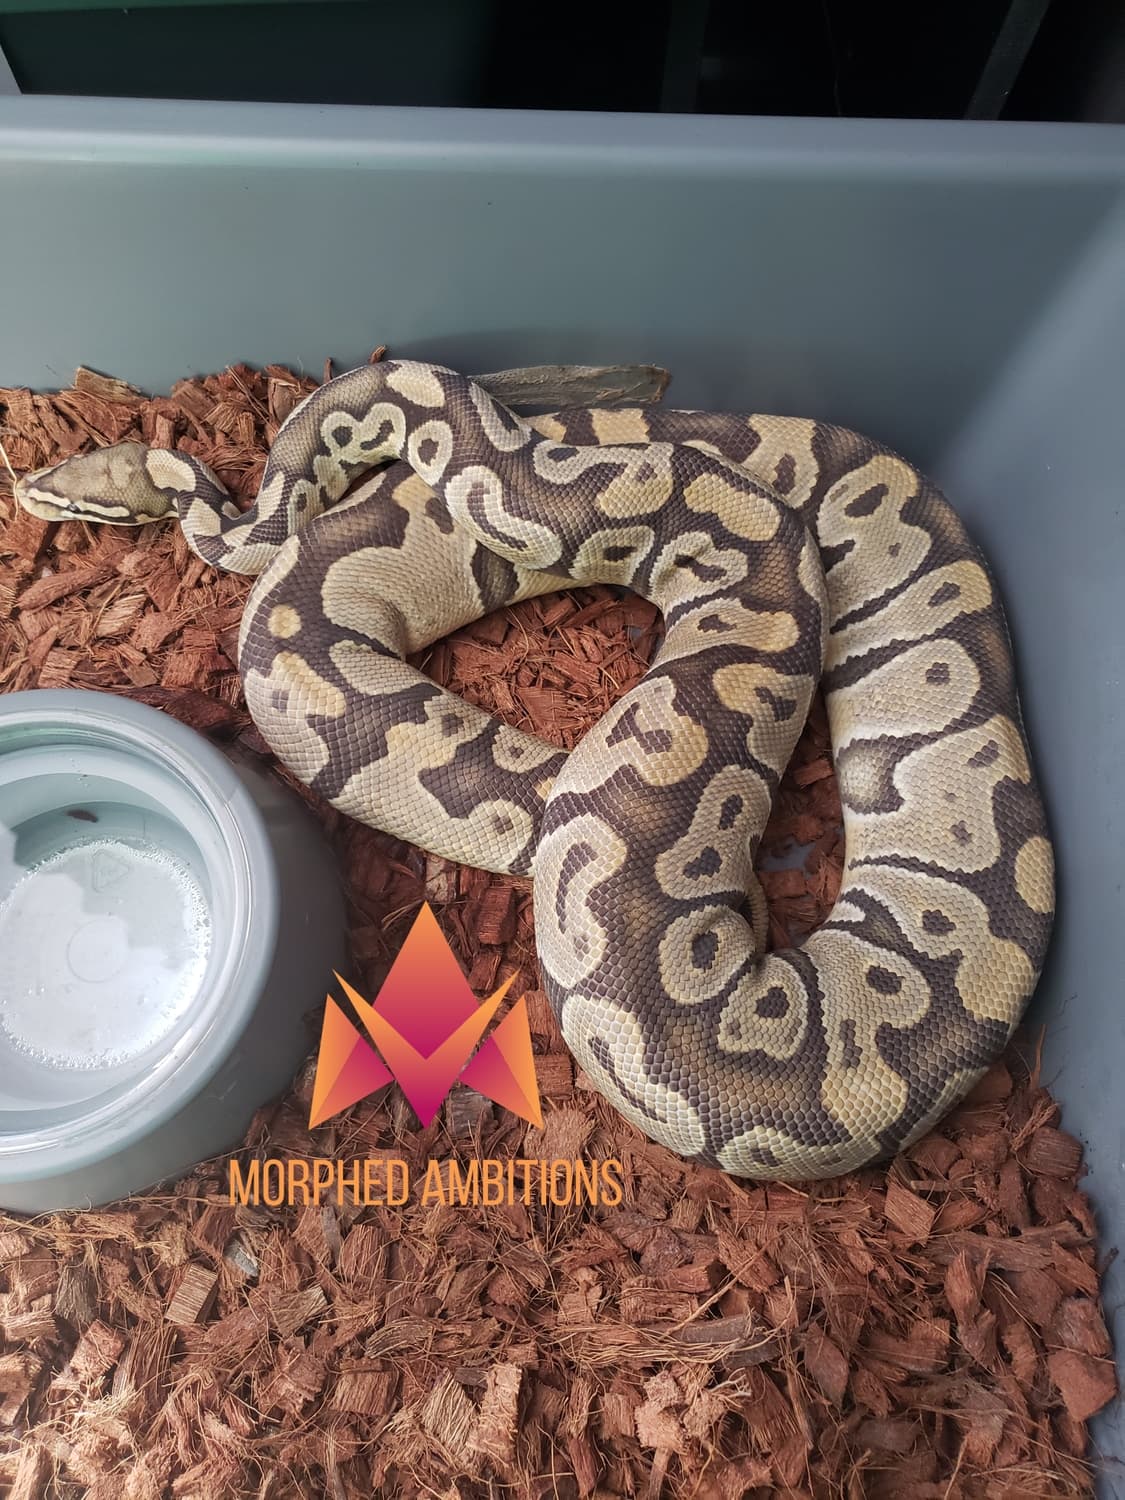 Vesper Ghost Ball Python by Morphed Ambitions